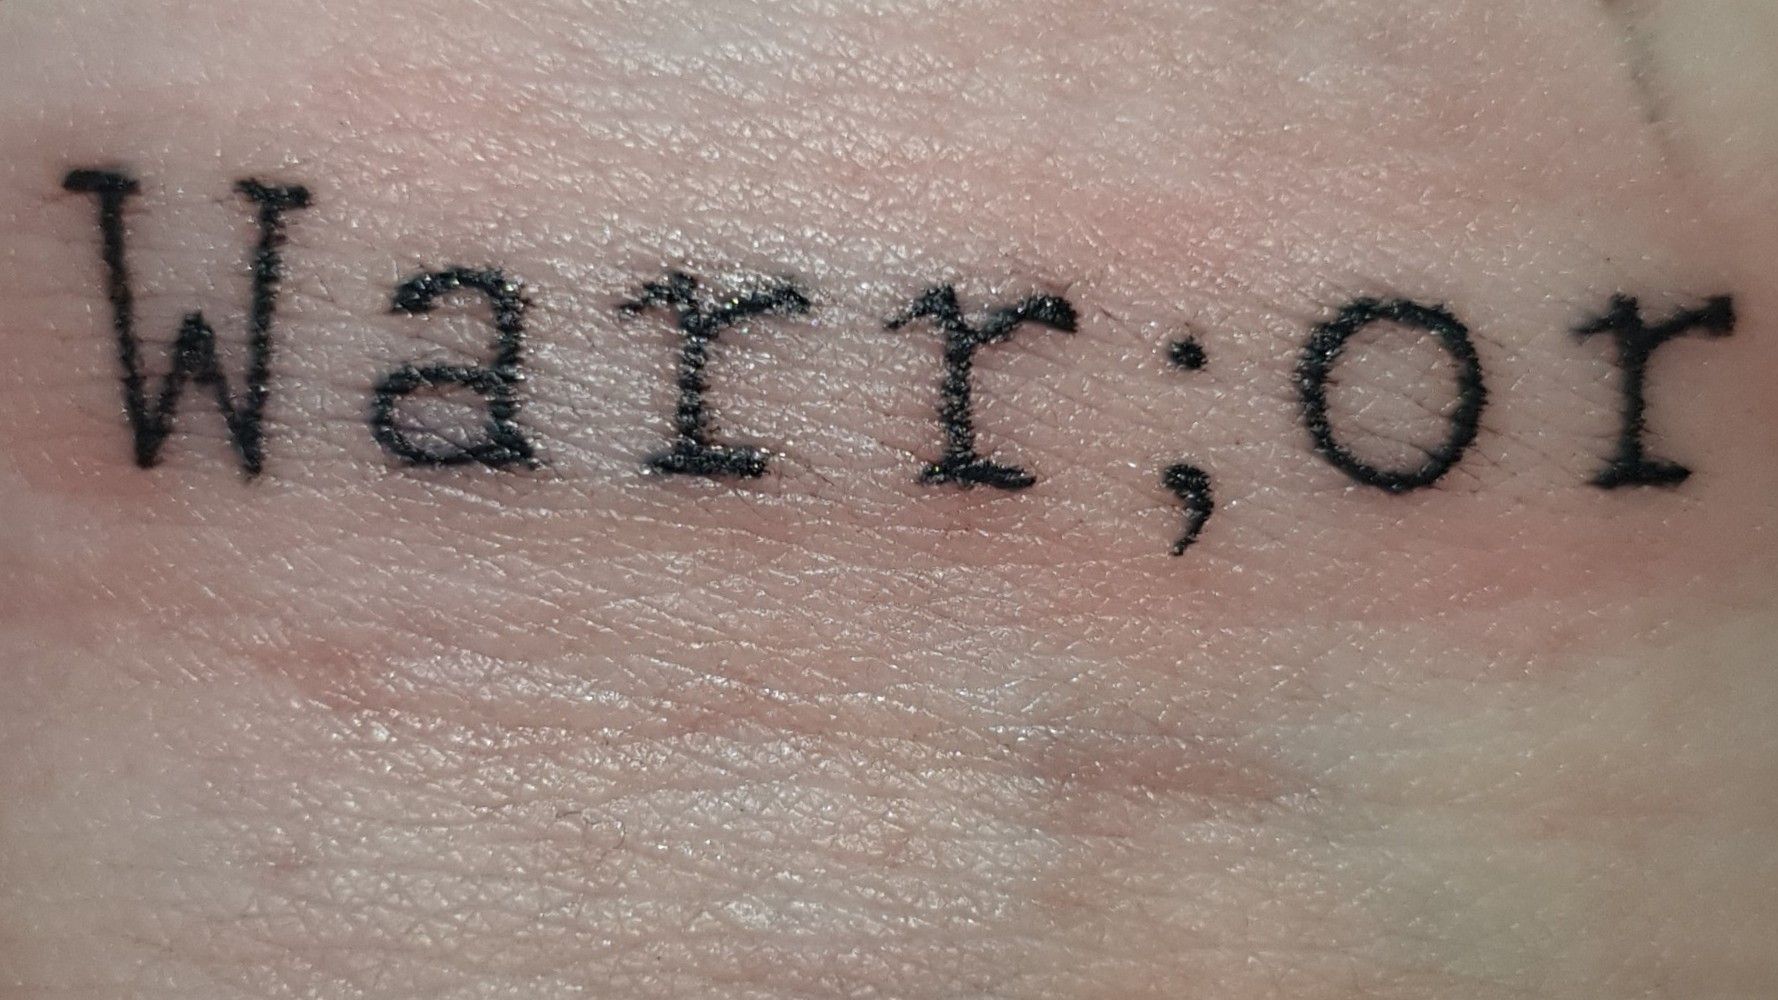 66 Meaningful Oneword Tattoos That Say A Million Things